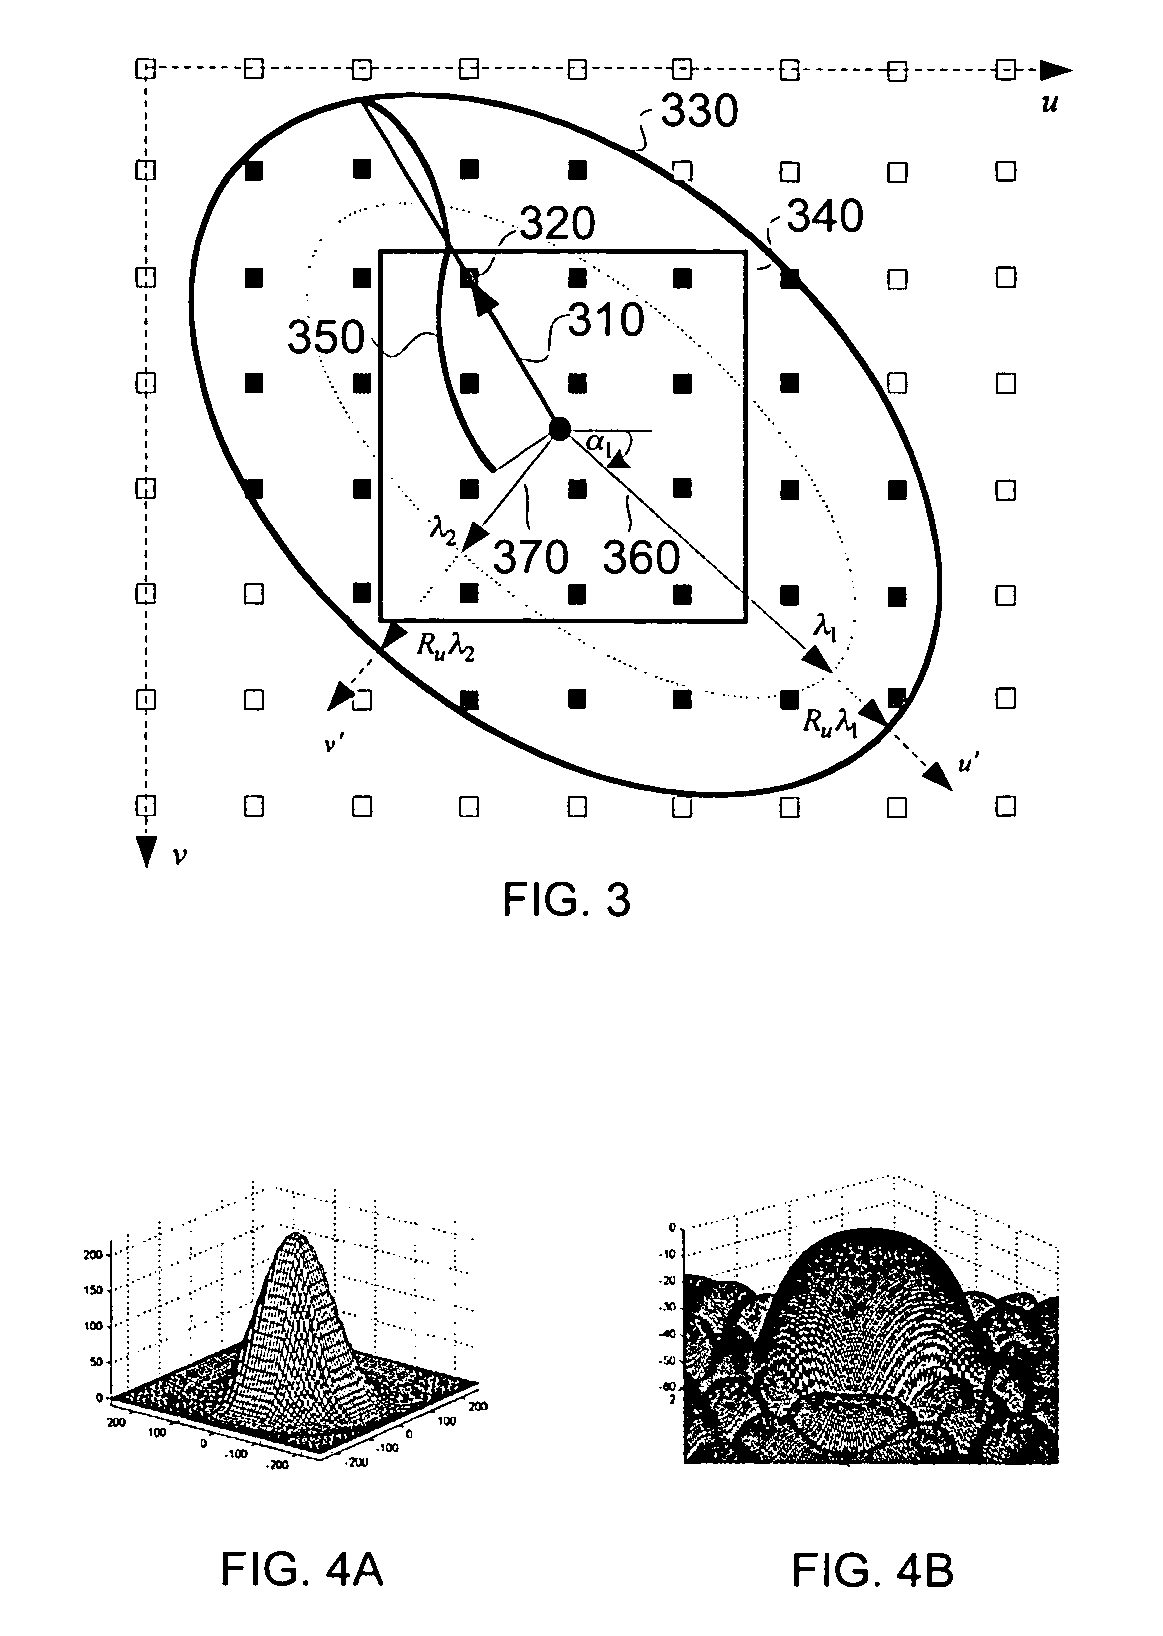 Single-pass image resampling system and method with anisotropic filtering